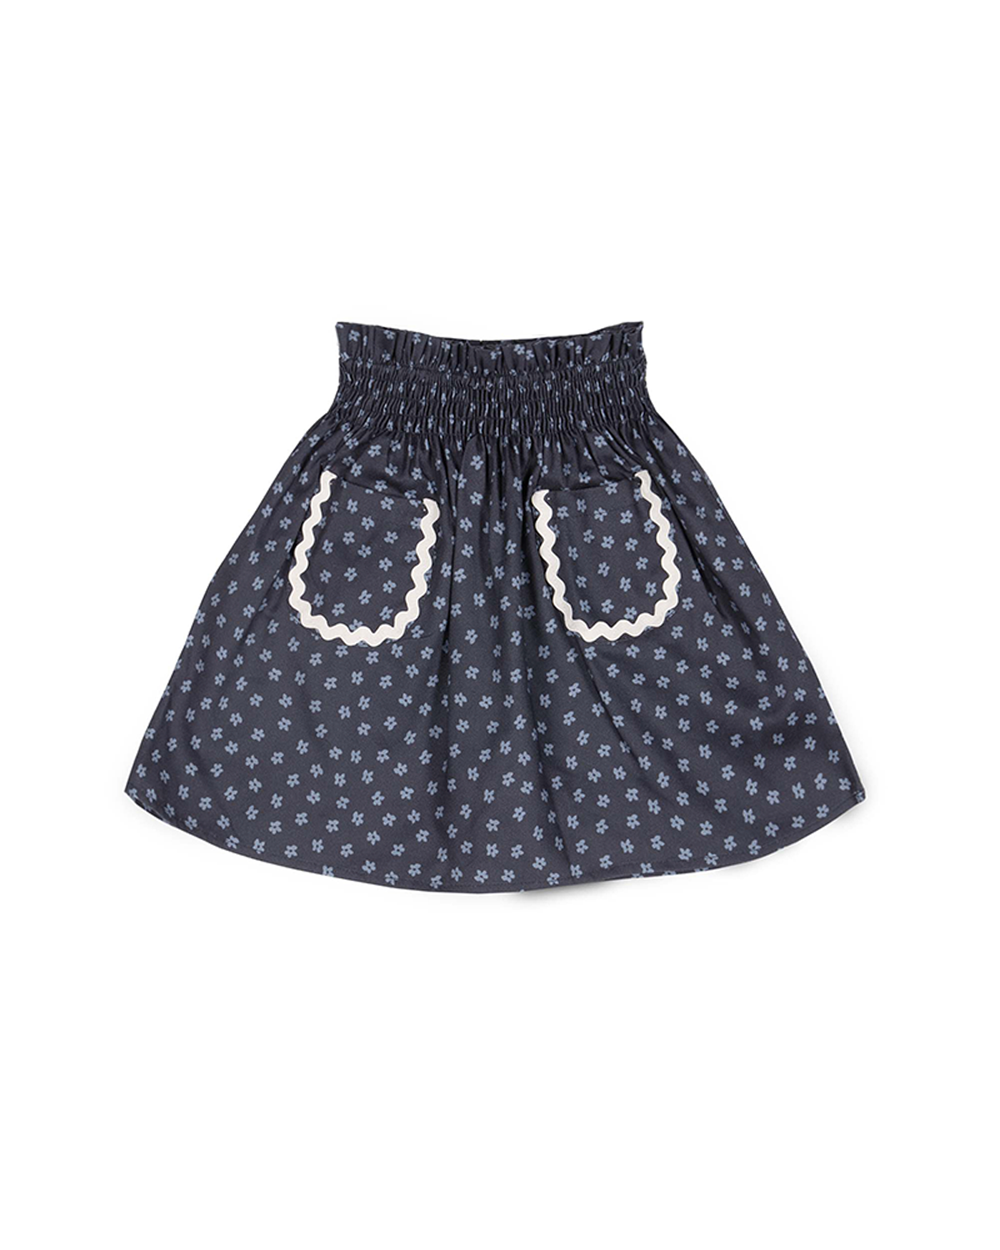 [MIPOUNET] LUCIE PRINTED SKIRT [4Y, 6Y]